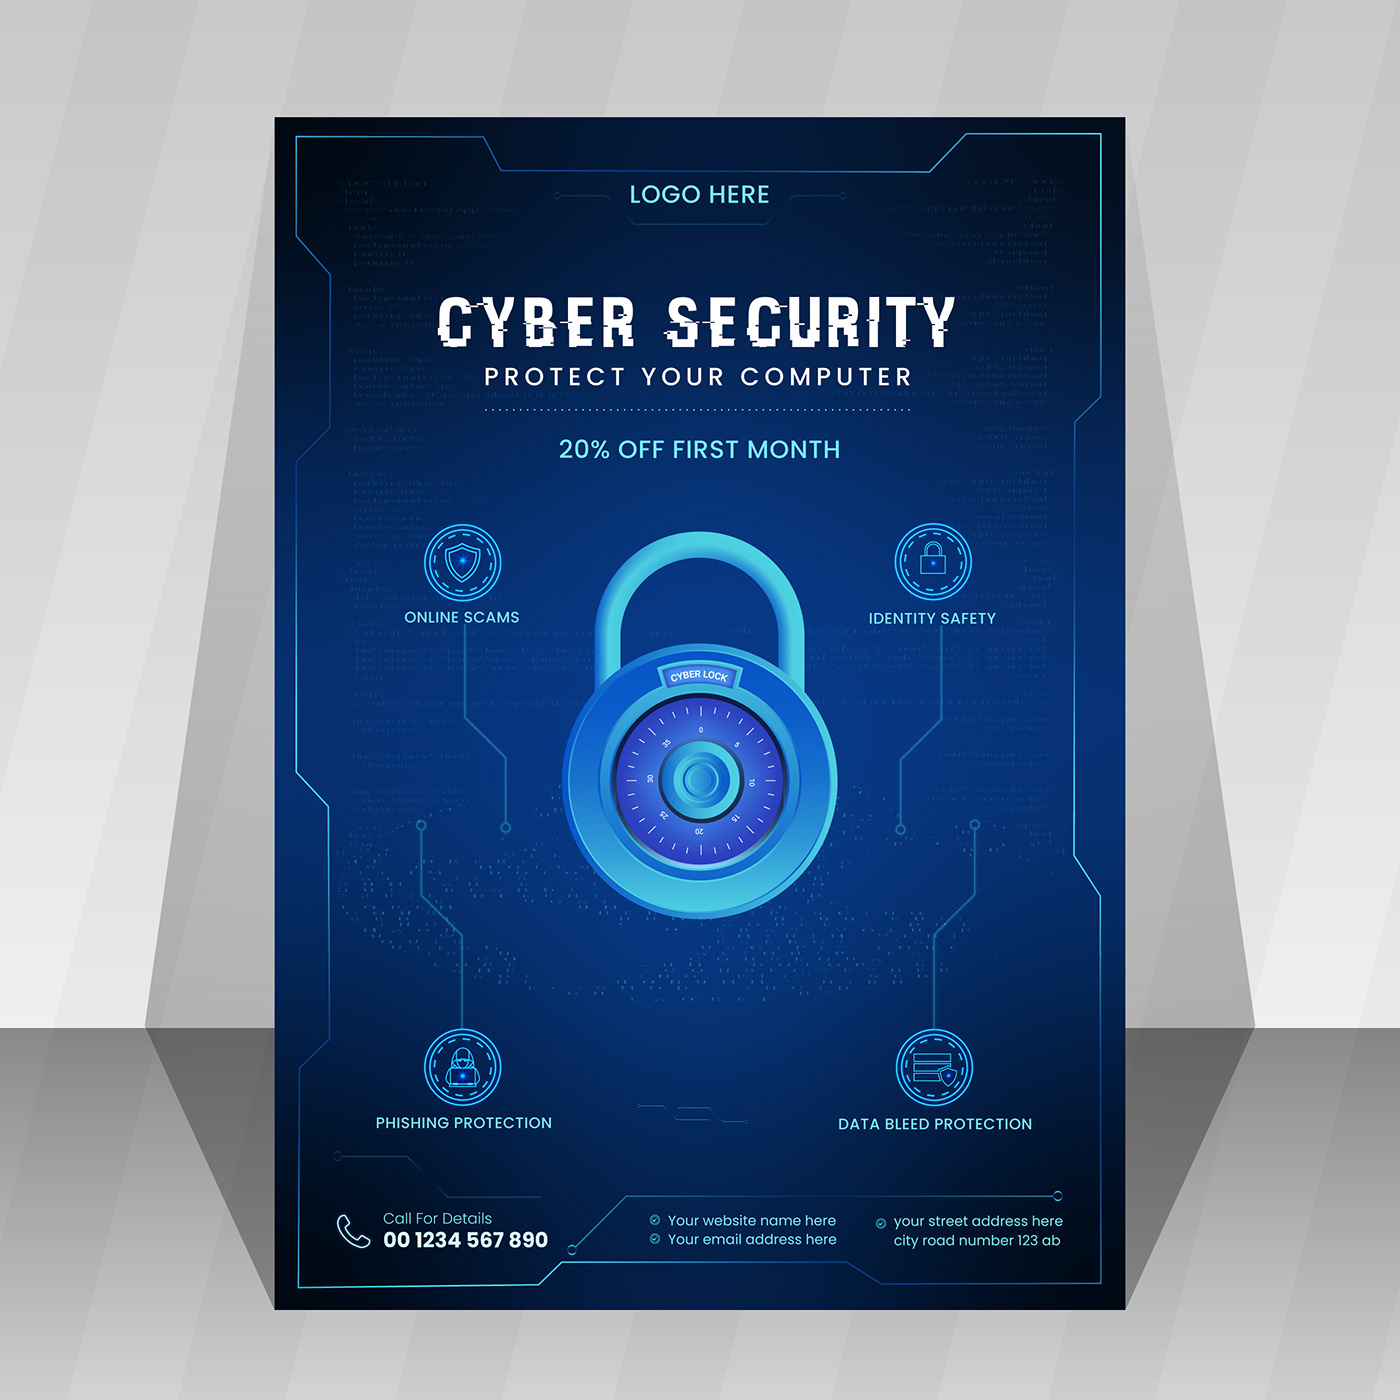 security Flyer Design flyers banners marketing   syber